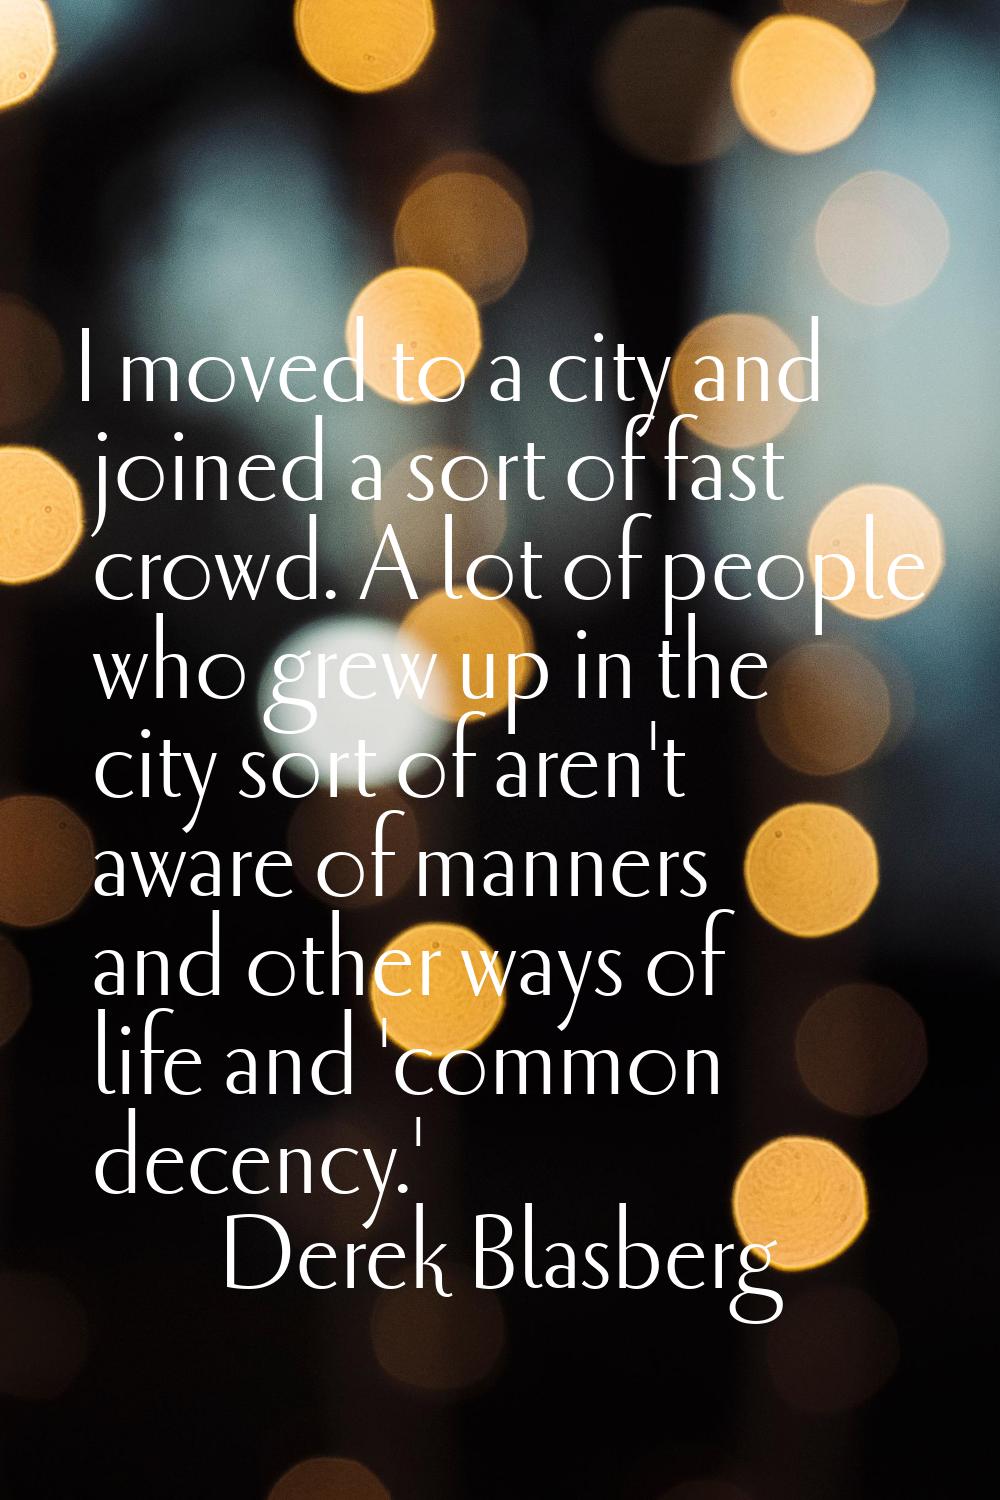 I moved to a city and joined a sort of fast crowd. A lot of people who grew up in the city sort of 